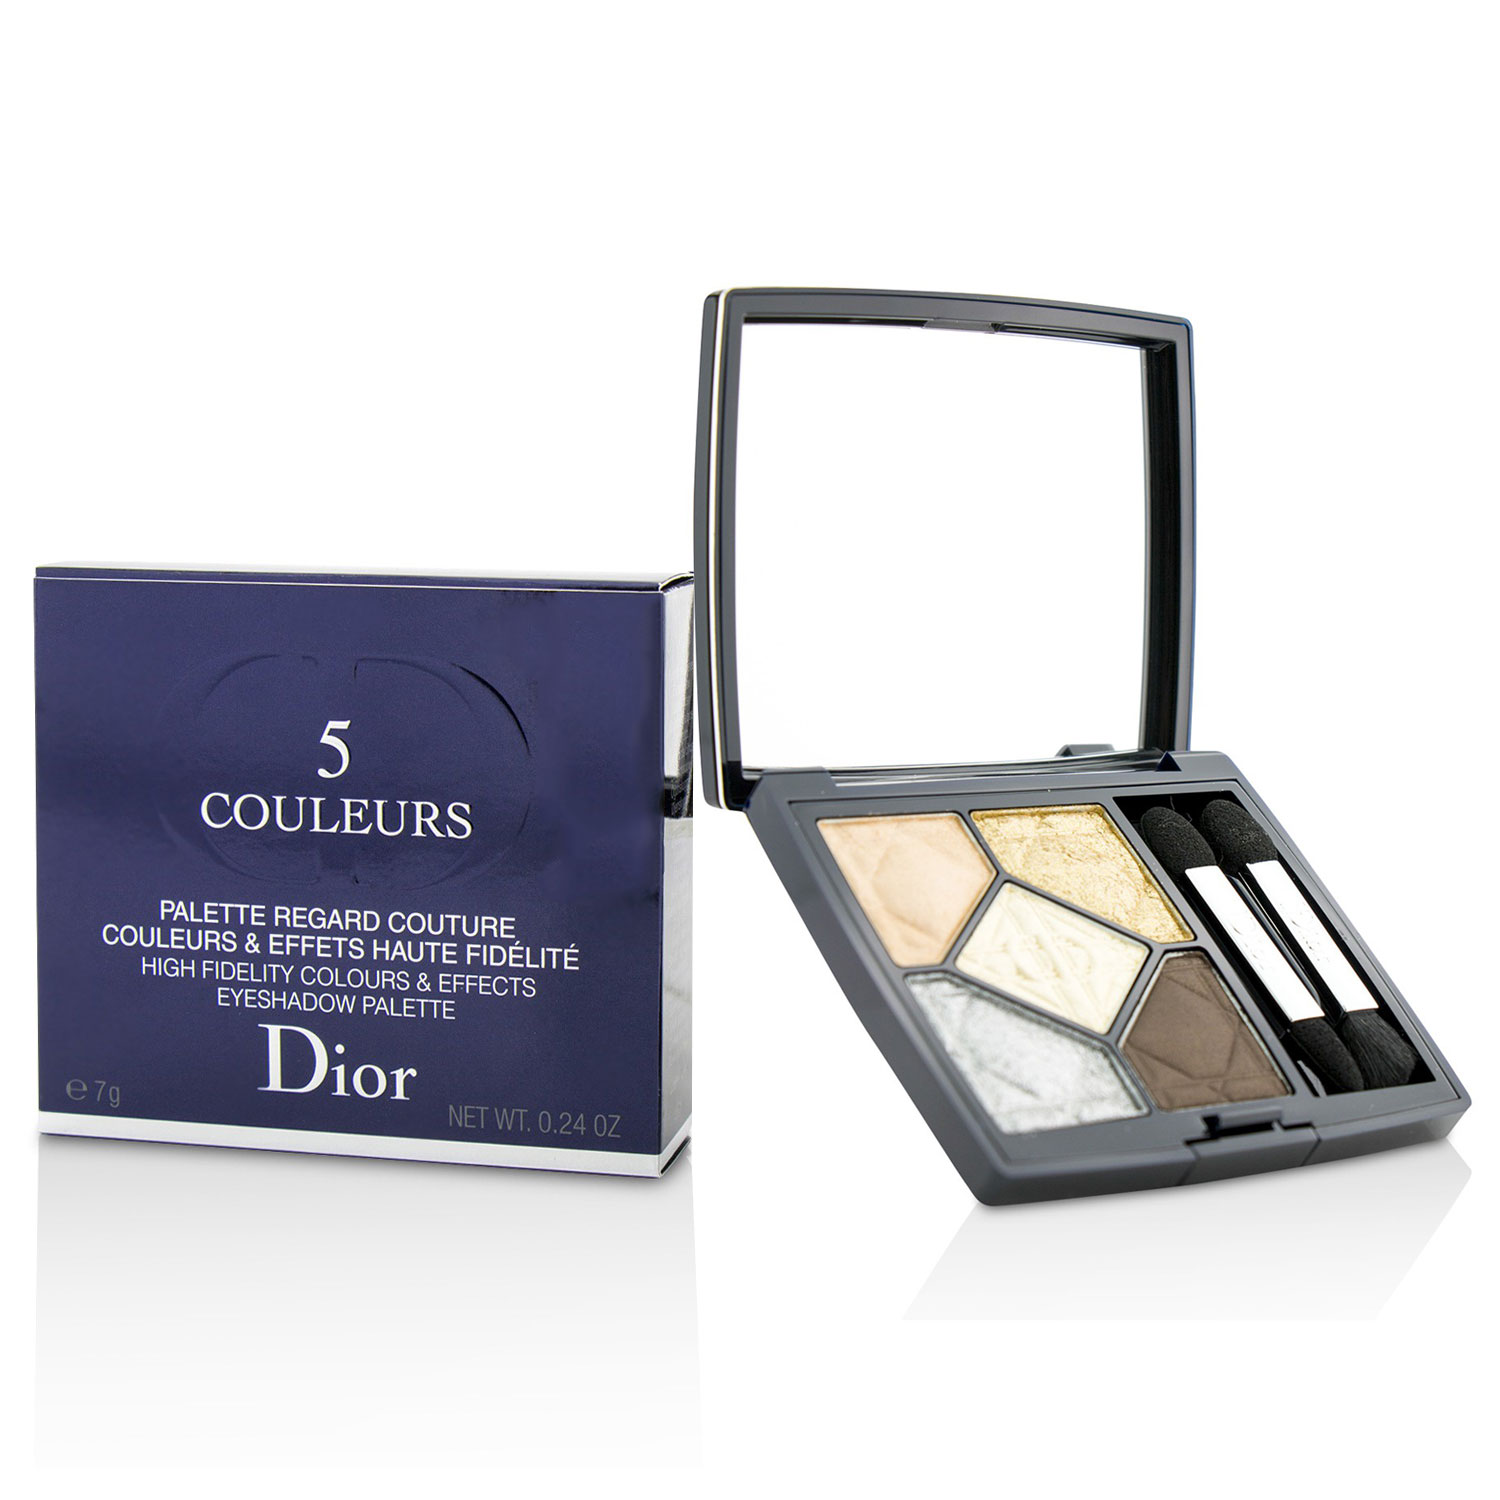 5 Couleurs High Fidelity Colors & Effects Eyeshadow Palette - # 567 Adore Christian Dior Image